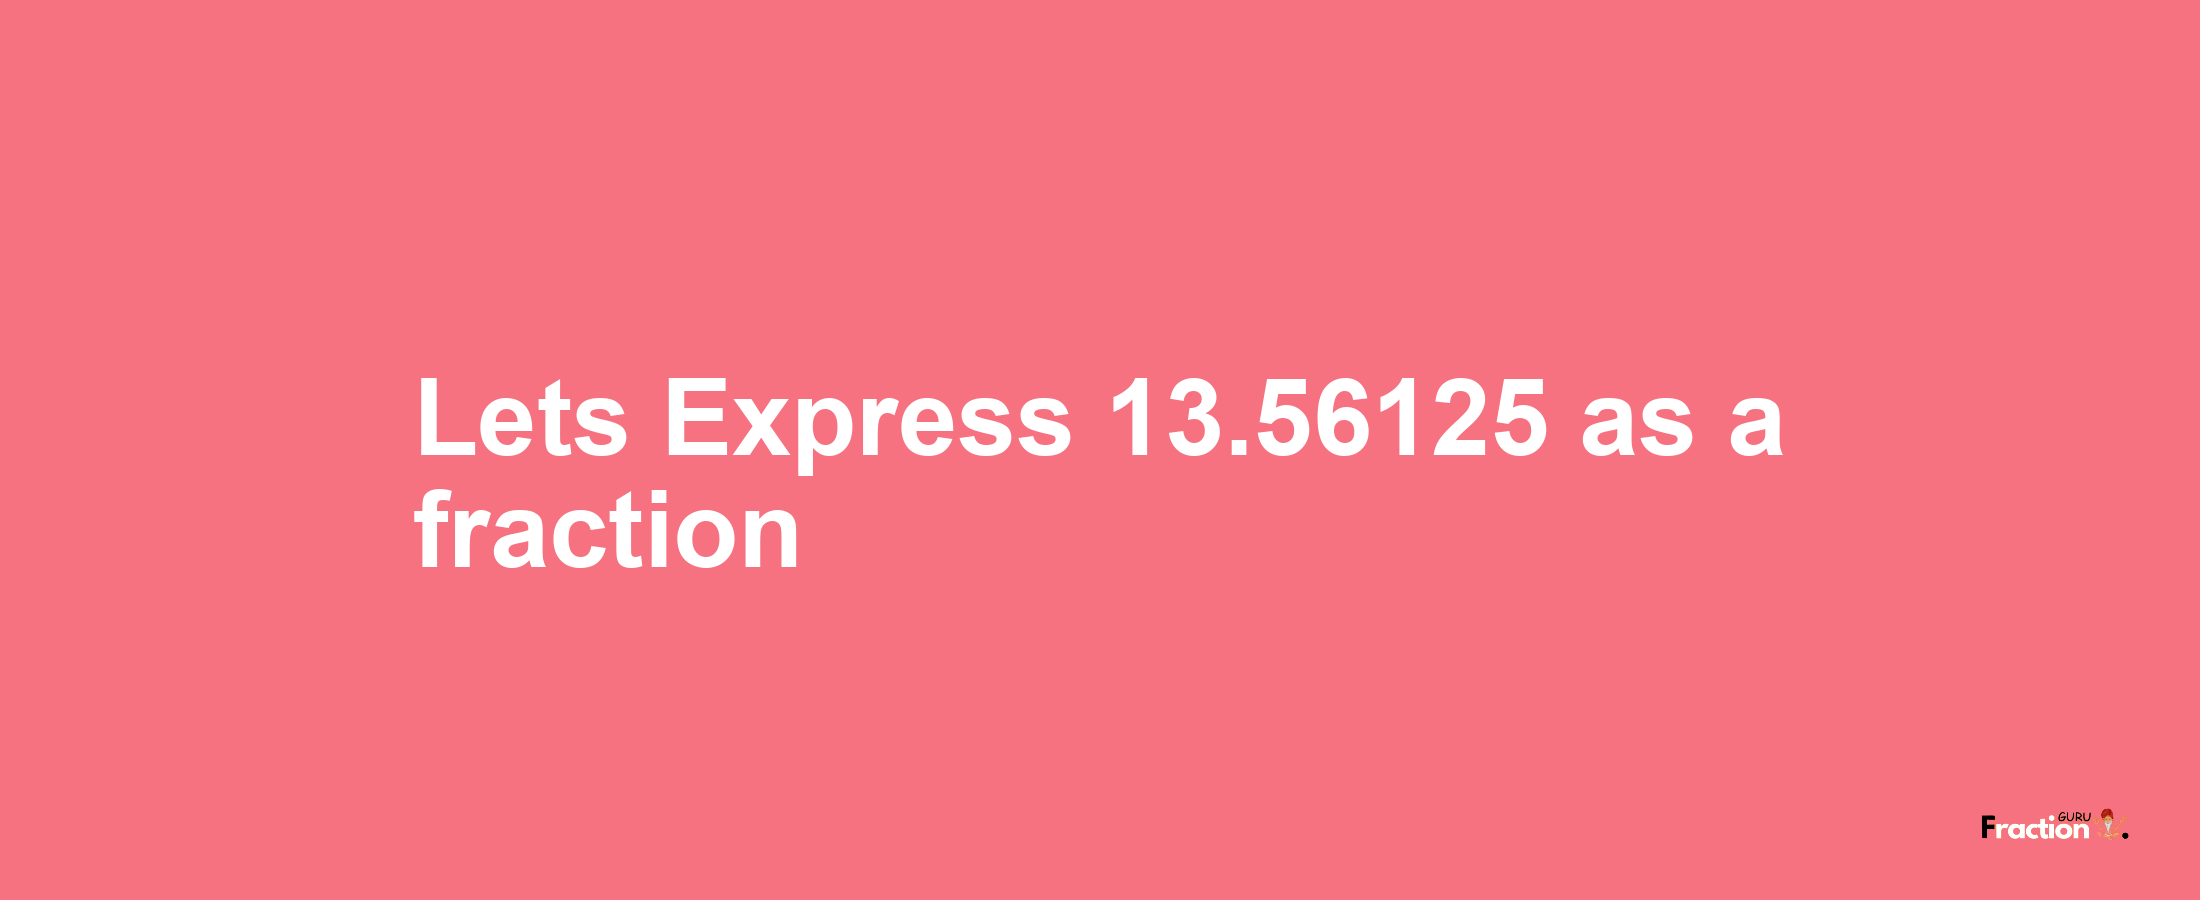 Lets Express 13.56125 as afraction